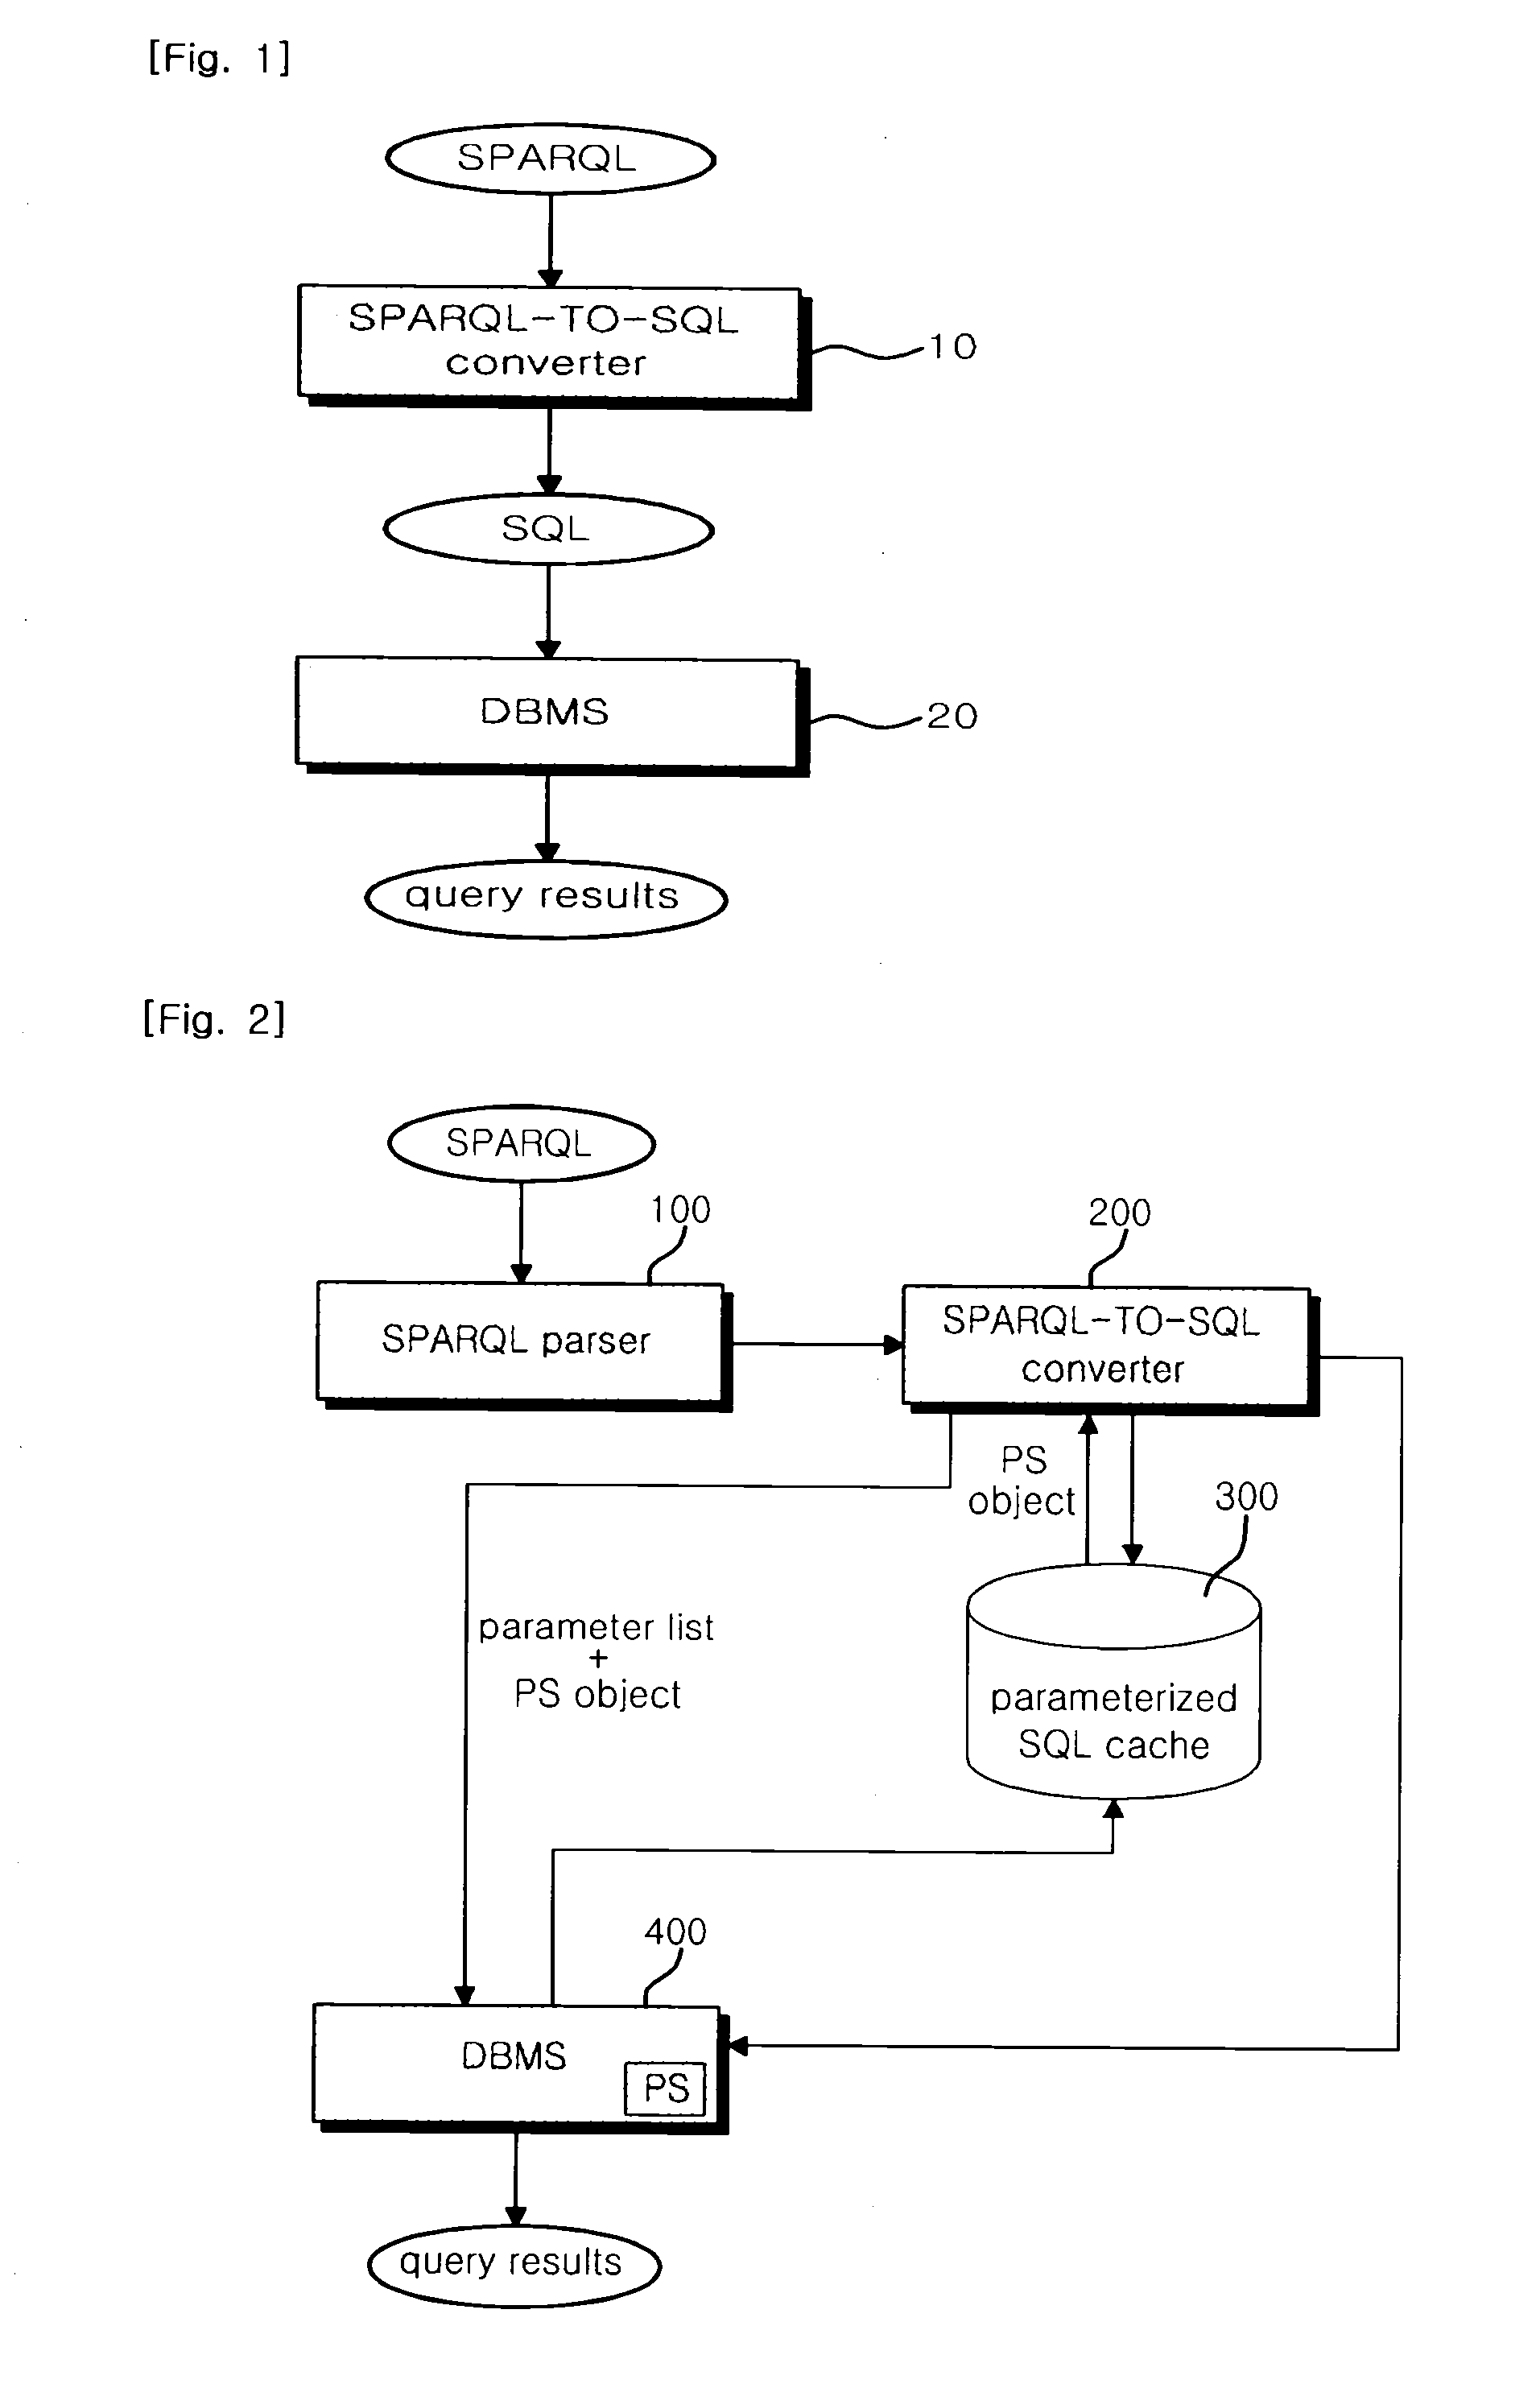 System and method for sparql-query processing using the parametrized-sparql-query in based dbms